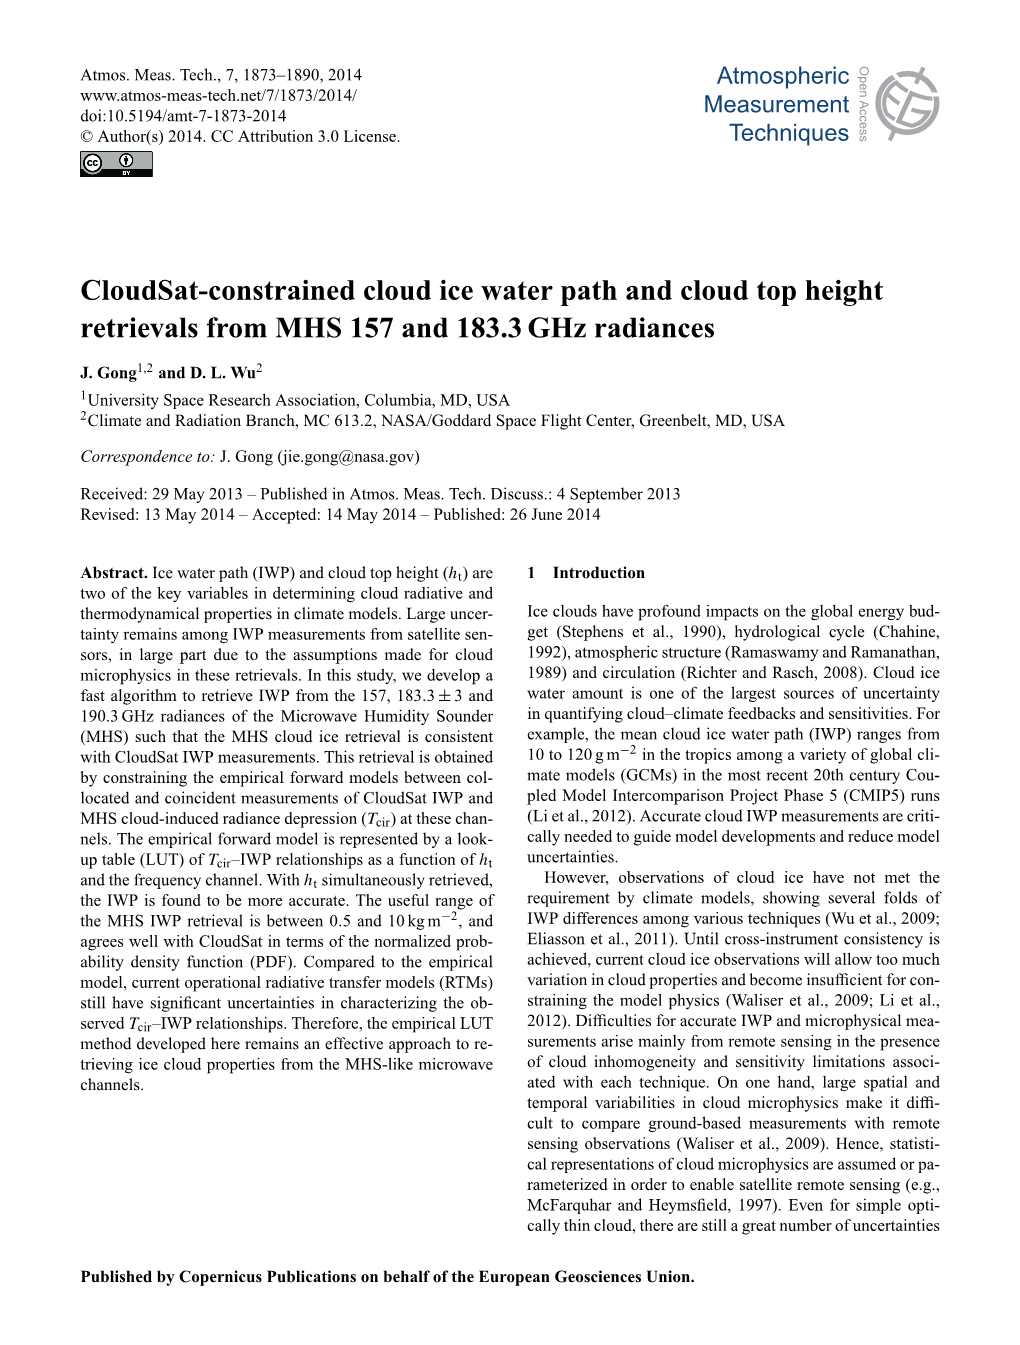 Cloudsat-Constrained Cloud Ice Water Path and Cloud Top Height Retrievals from MHS 157 and 183.3 Ghz Radiances